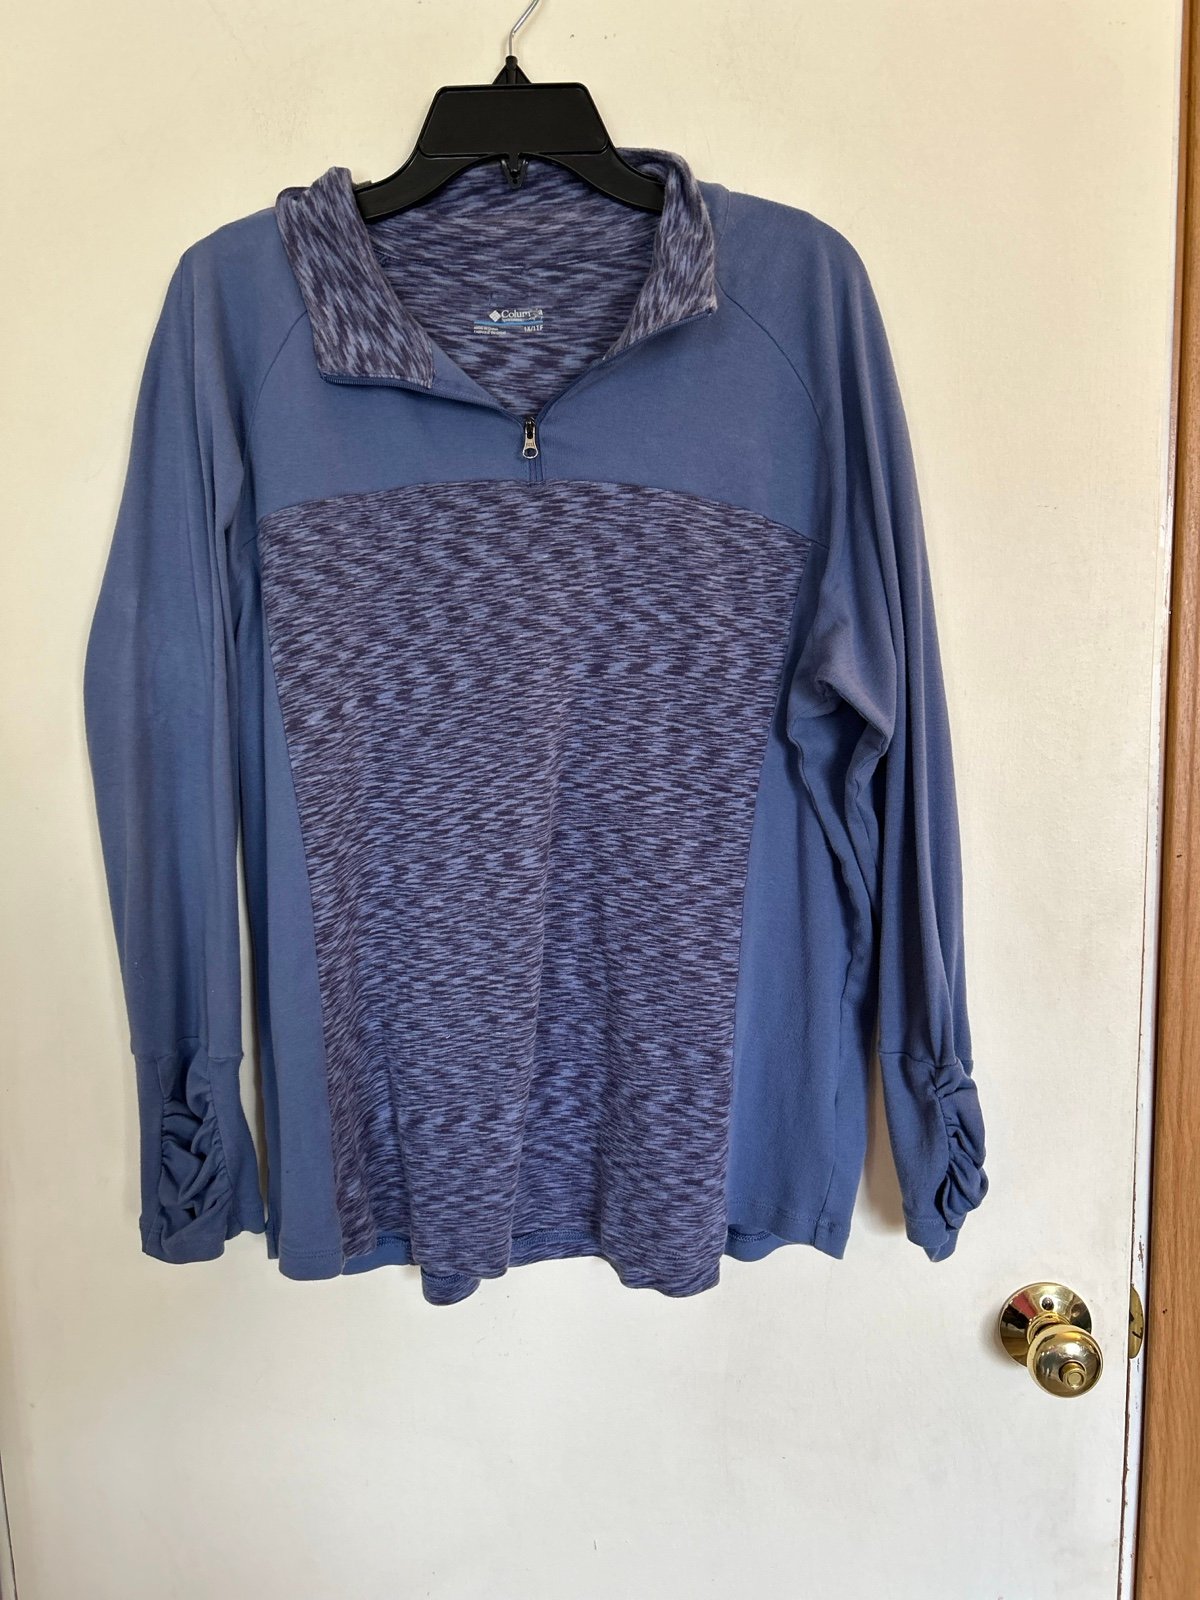 cheapest place to buy  Columbia Womens 1/4 Zip blue pull over sweater size 1X ocaj0eQyQ best sale